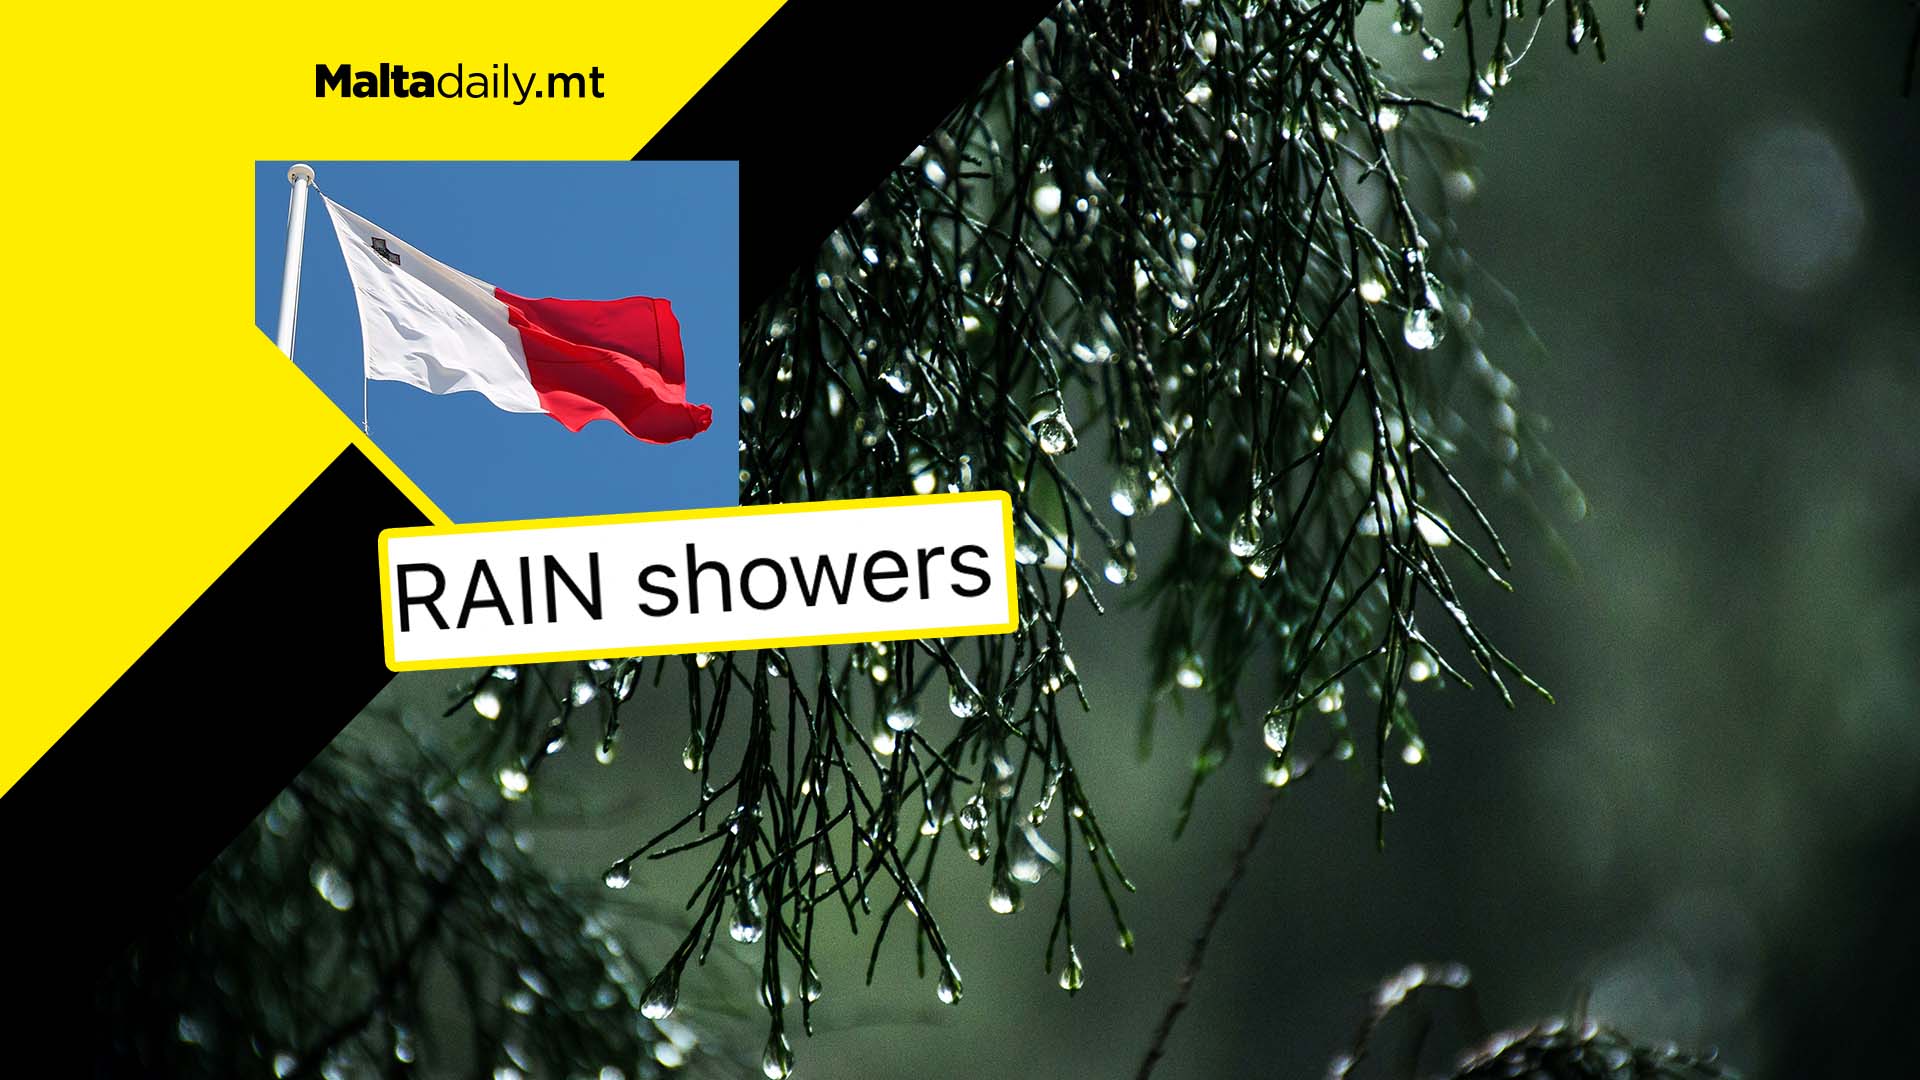 Rain showers and strong wings expected in Malta and Gozo on Sunday